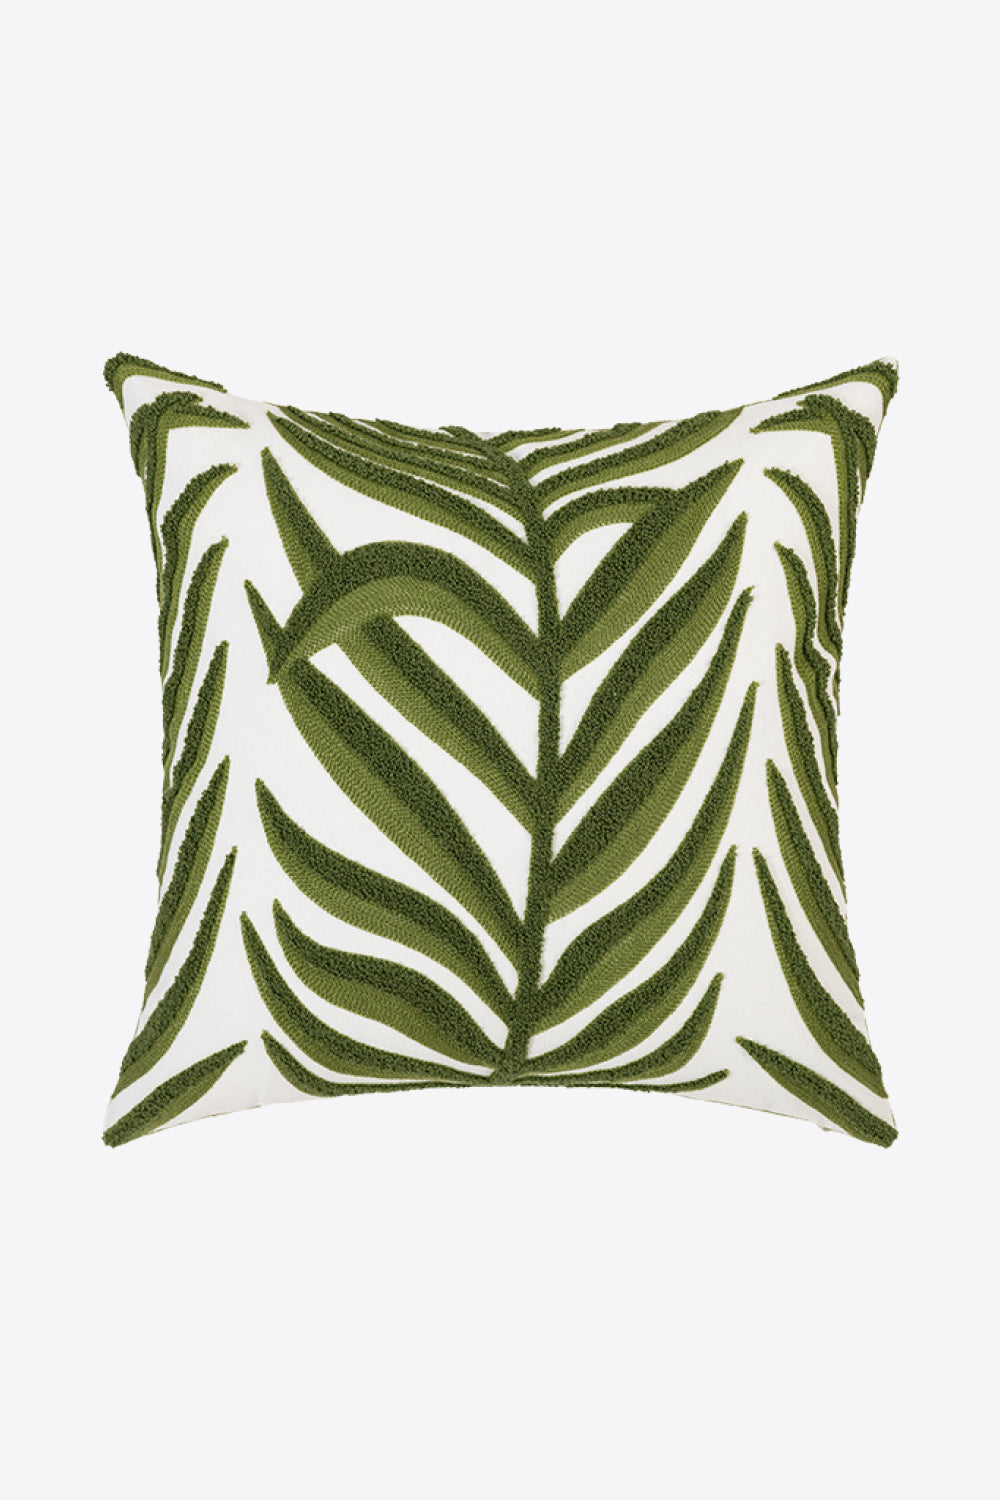 Dark Olive Green Embroidered Square Decorative Throw Pillow Case Home